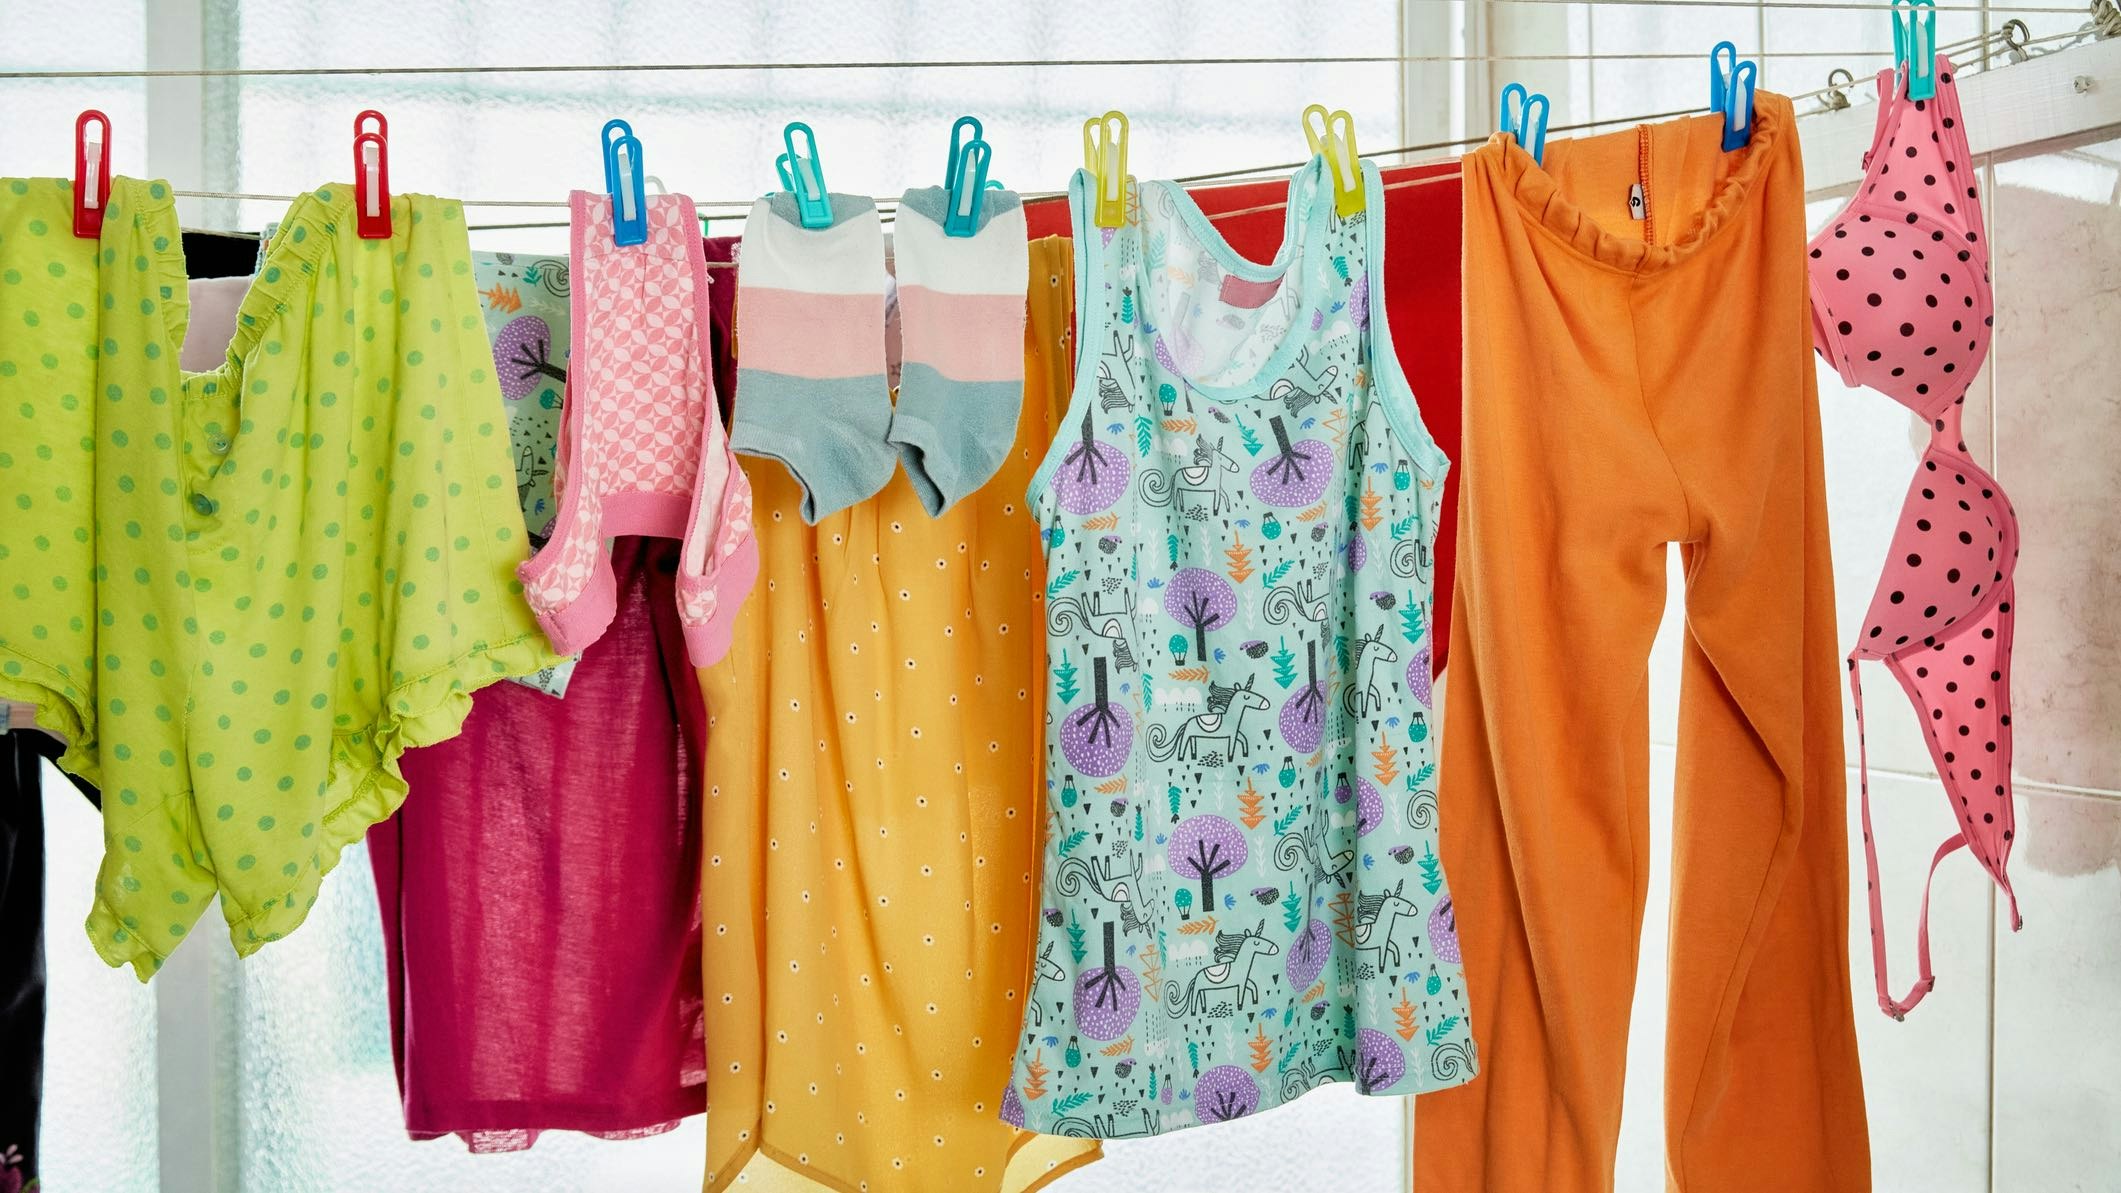 hanging clothes on an indoor line